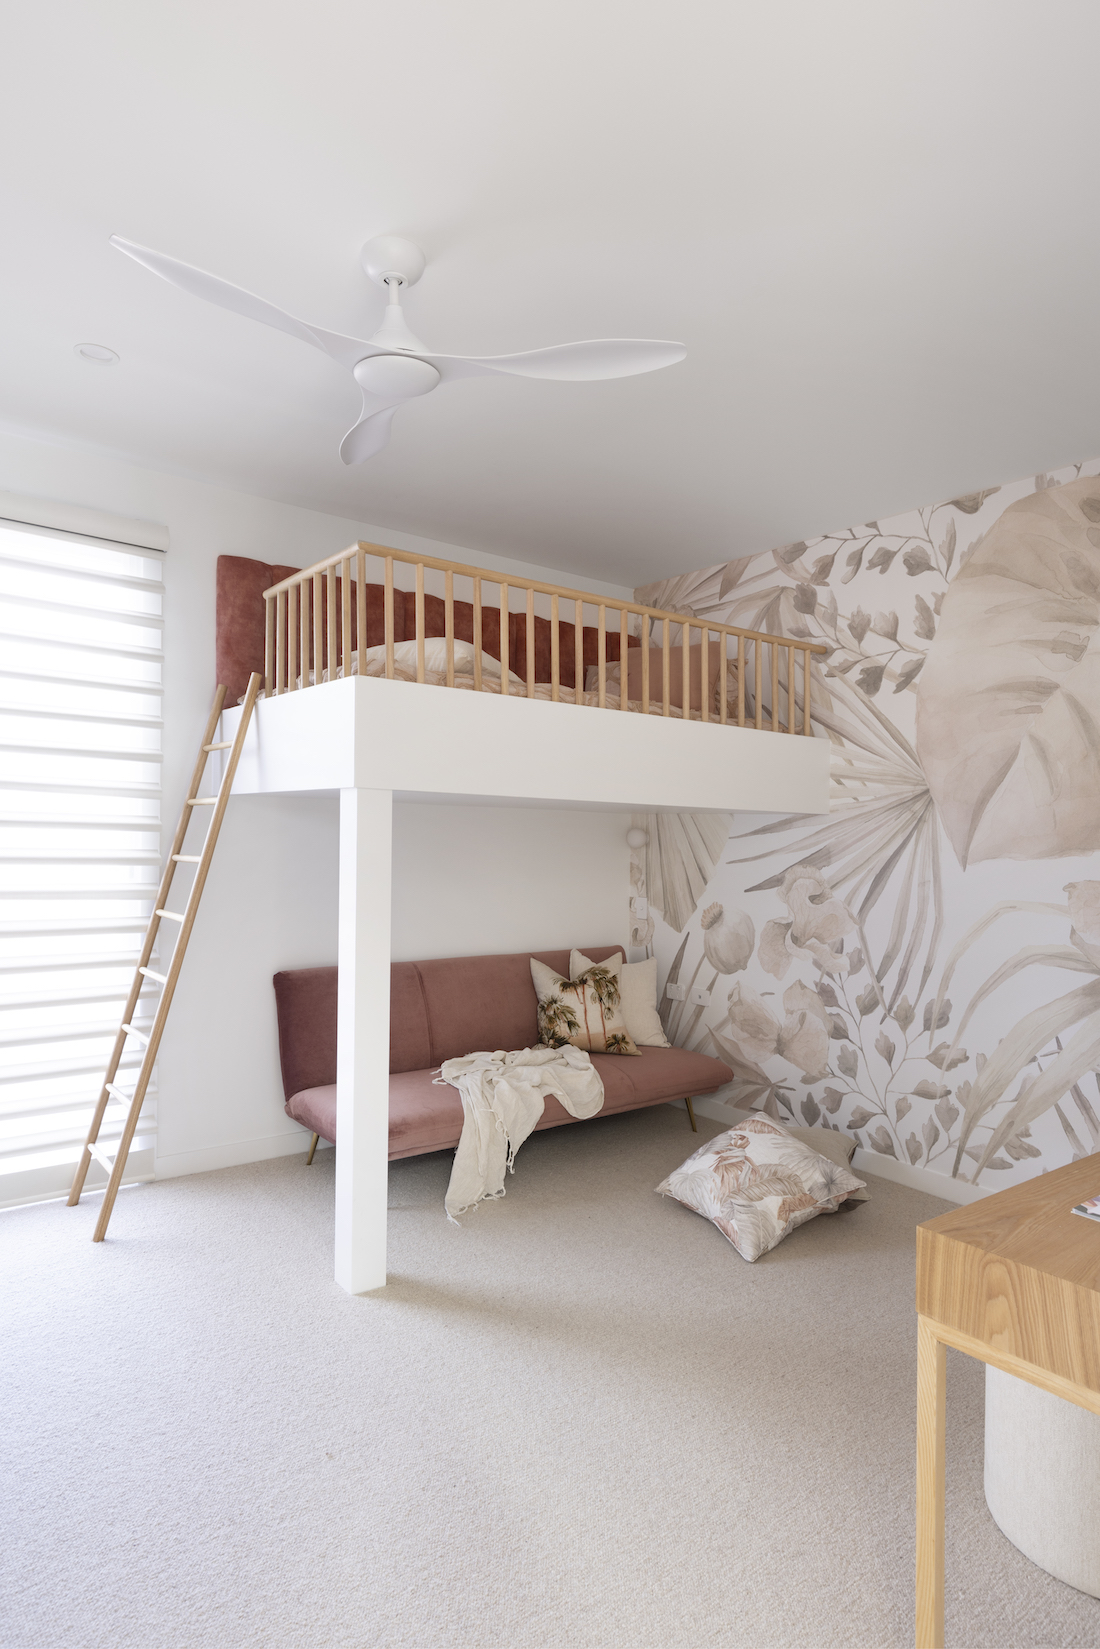 Cool built in bunk bed with ladder and statement wallpaper in girls bedroom